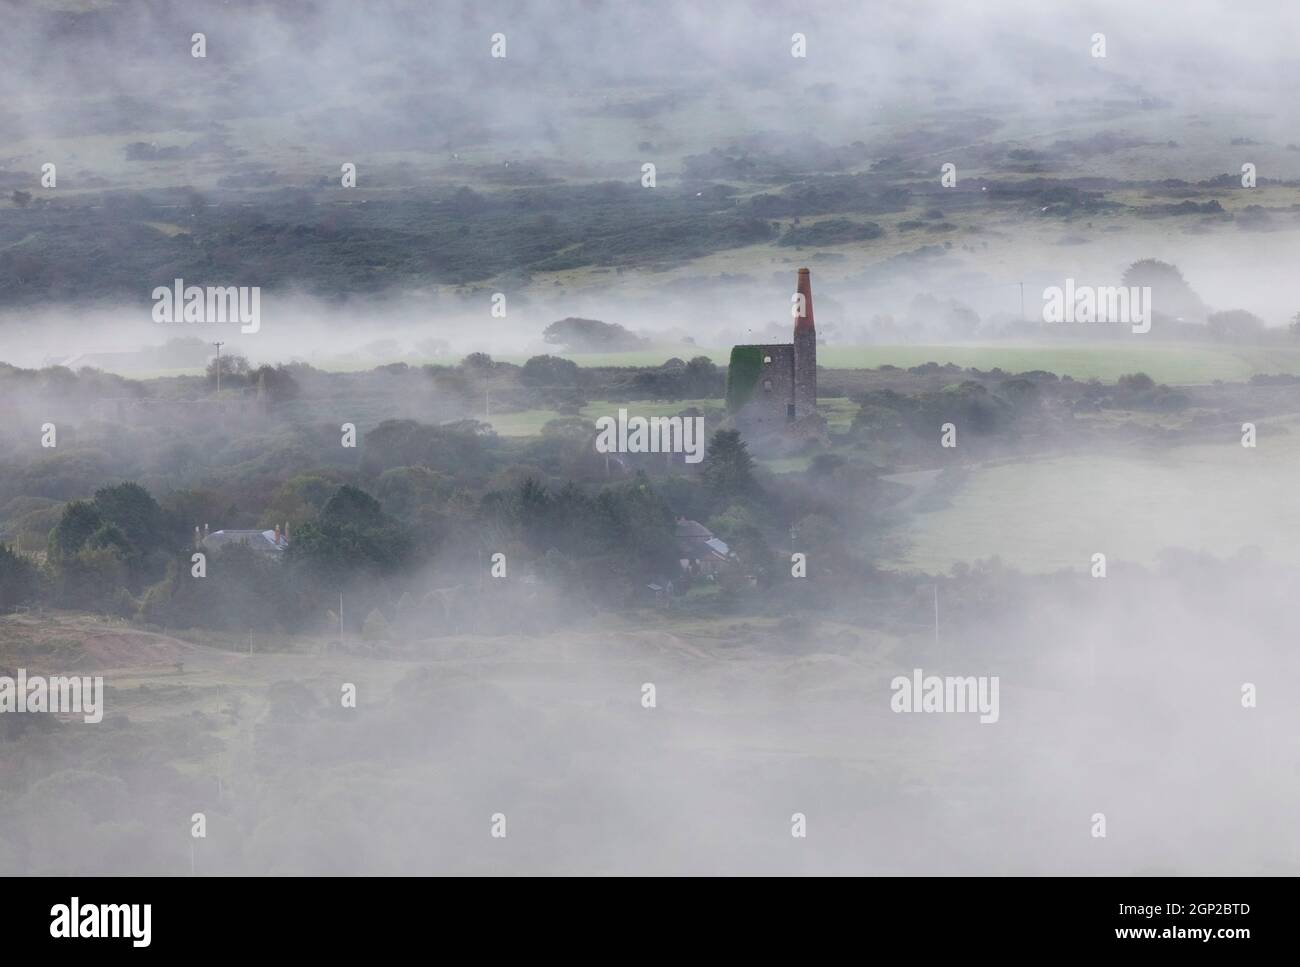 Prince of Wales Engine House In the Mist Stock Photo